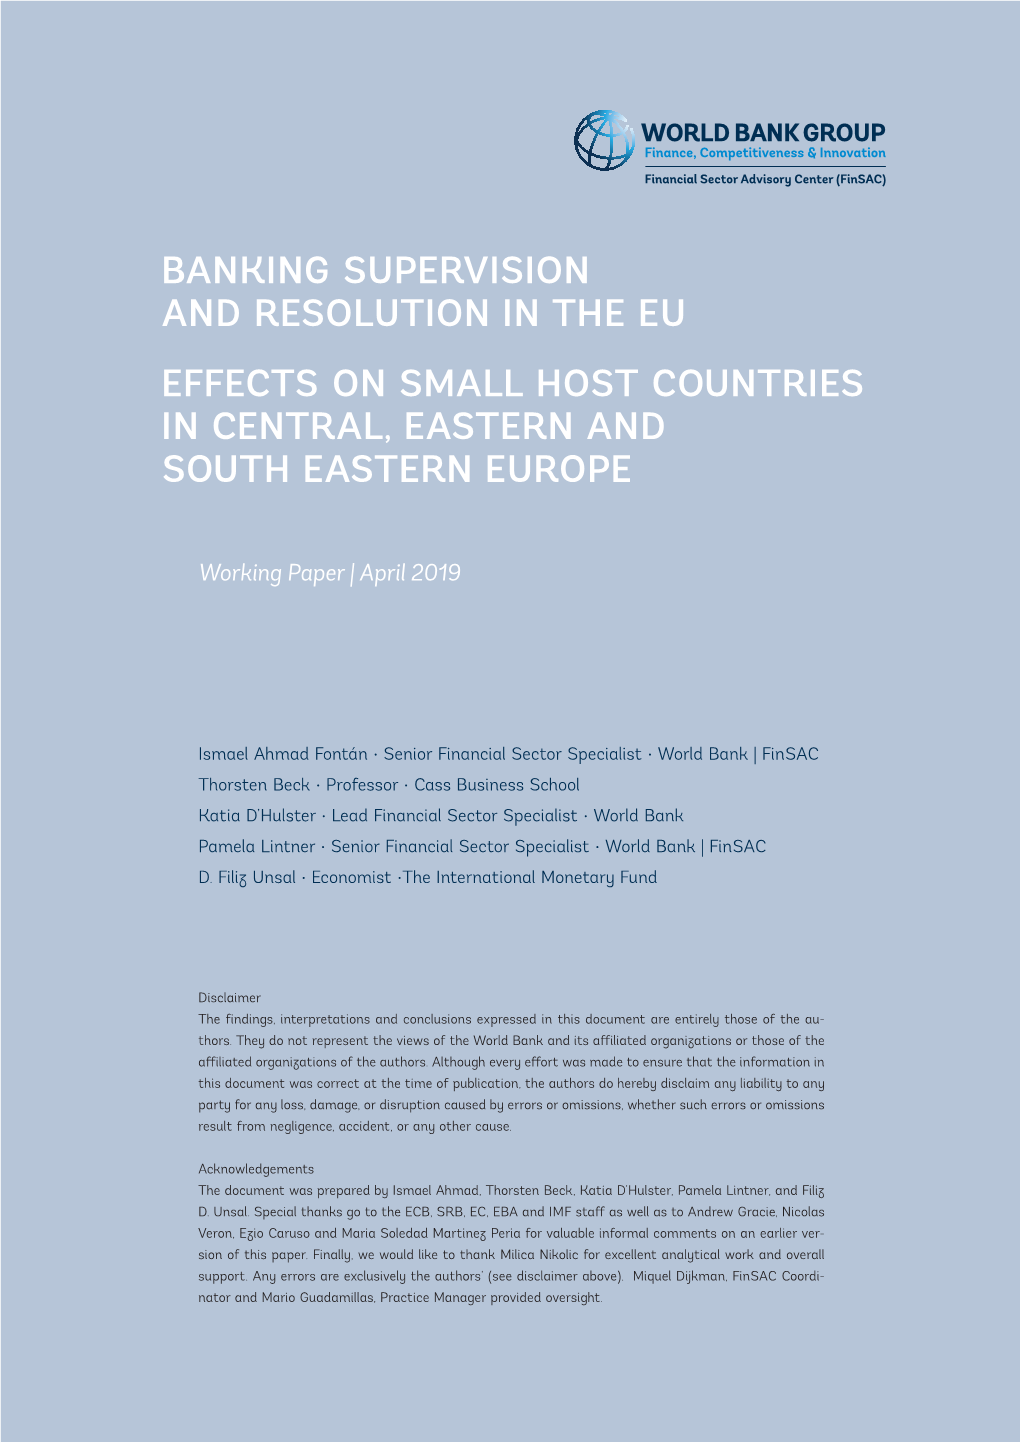 Banking Supervision and Resolution in the EU – Effects on Small Host